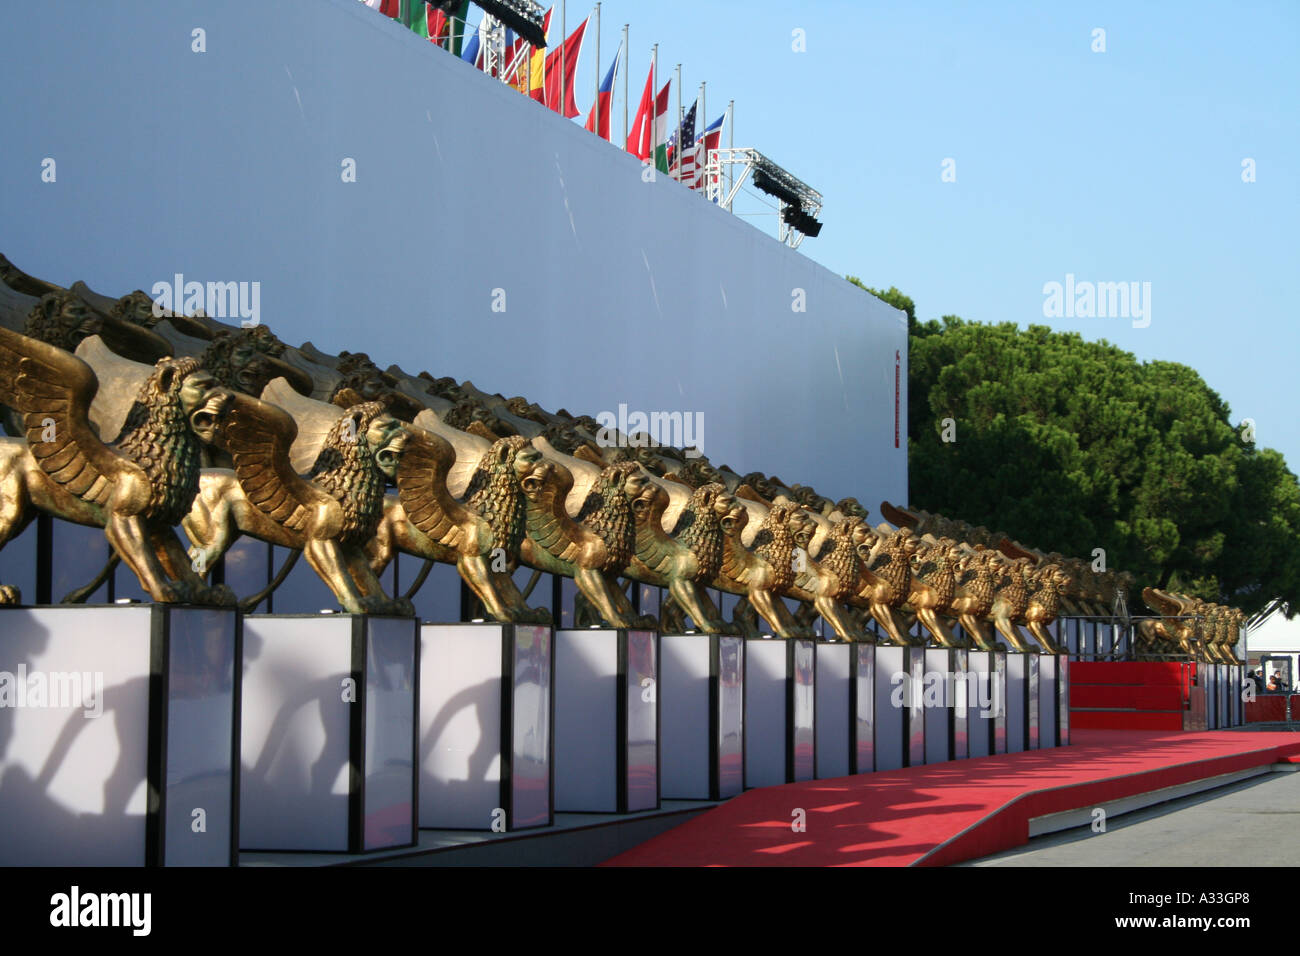 At the Venice Lido golden lions line up at the annual Film Festival, Veneto, Italy Stock Photo